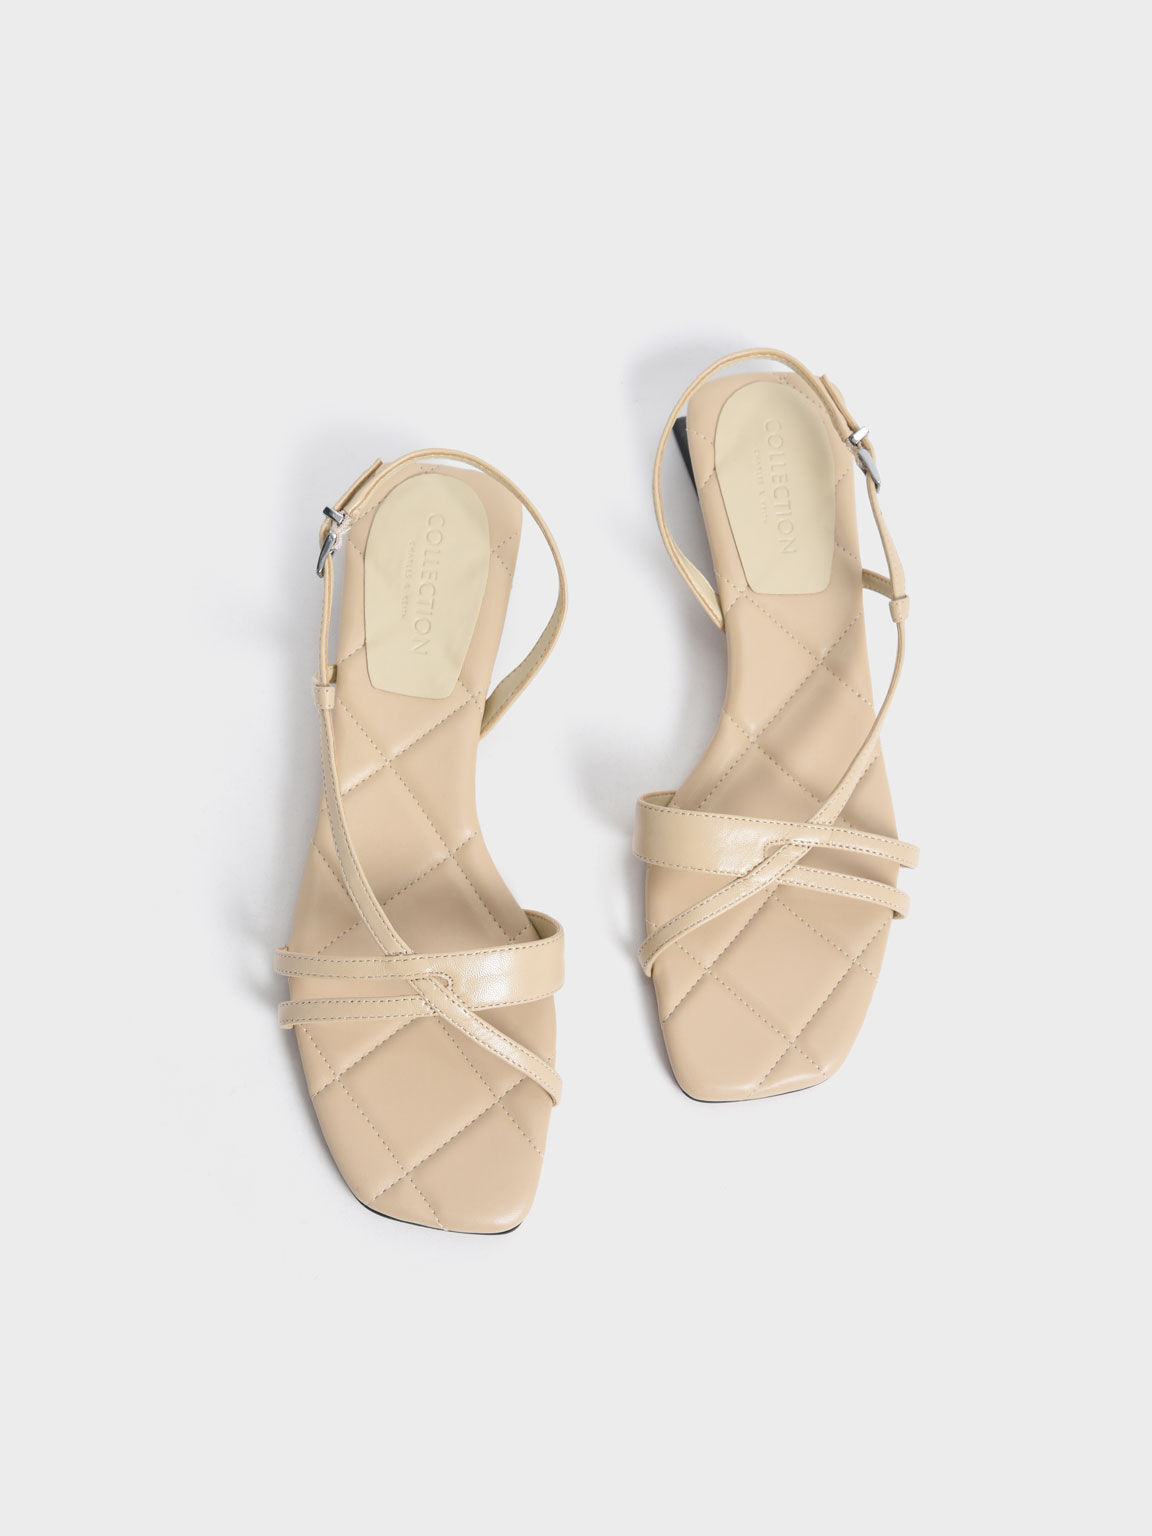 Chalk Leather Trapeze Heel Slingback Sandals - CHARLES & KEITH ID